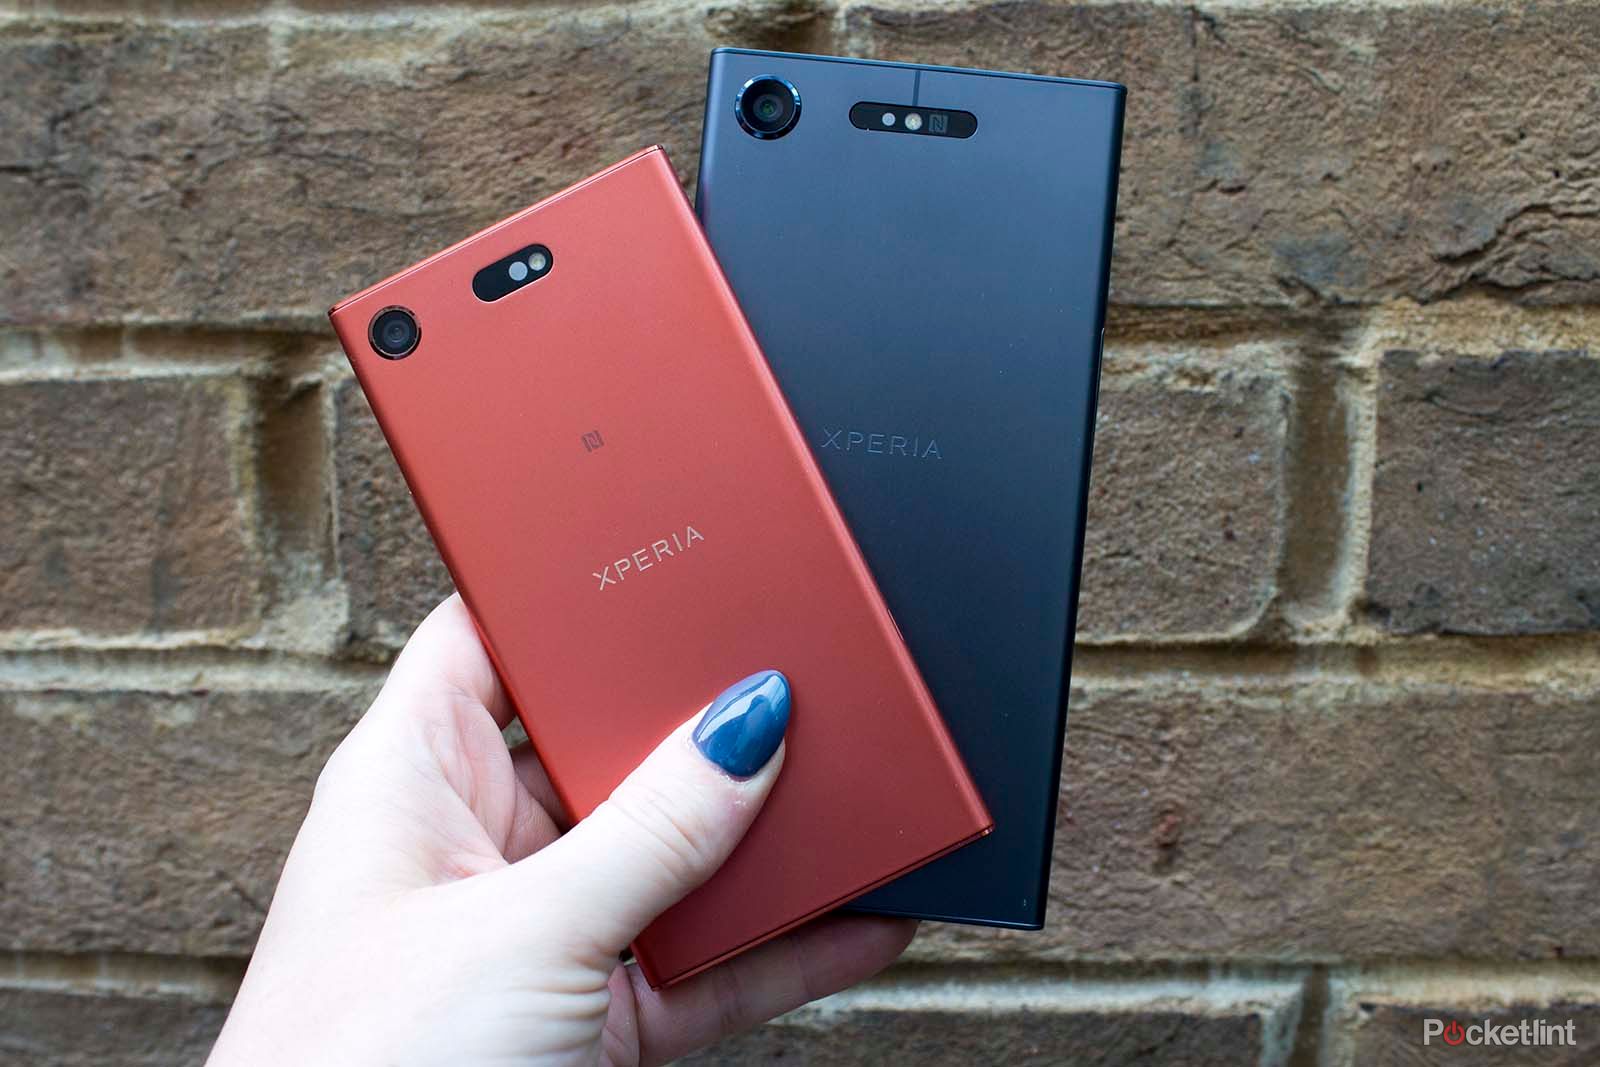 Leaked Xperia XZ2 Compact image all but confirms a curved future for Sony image 1